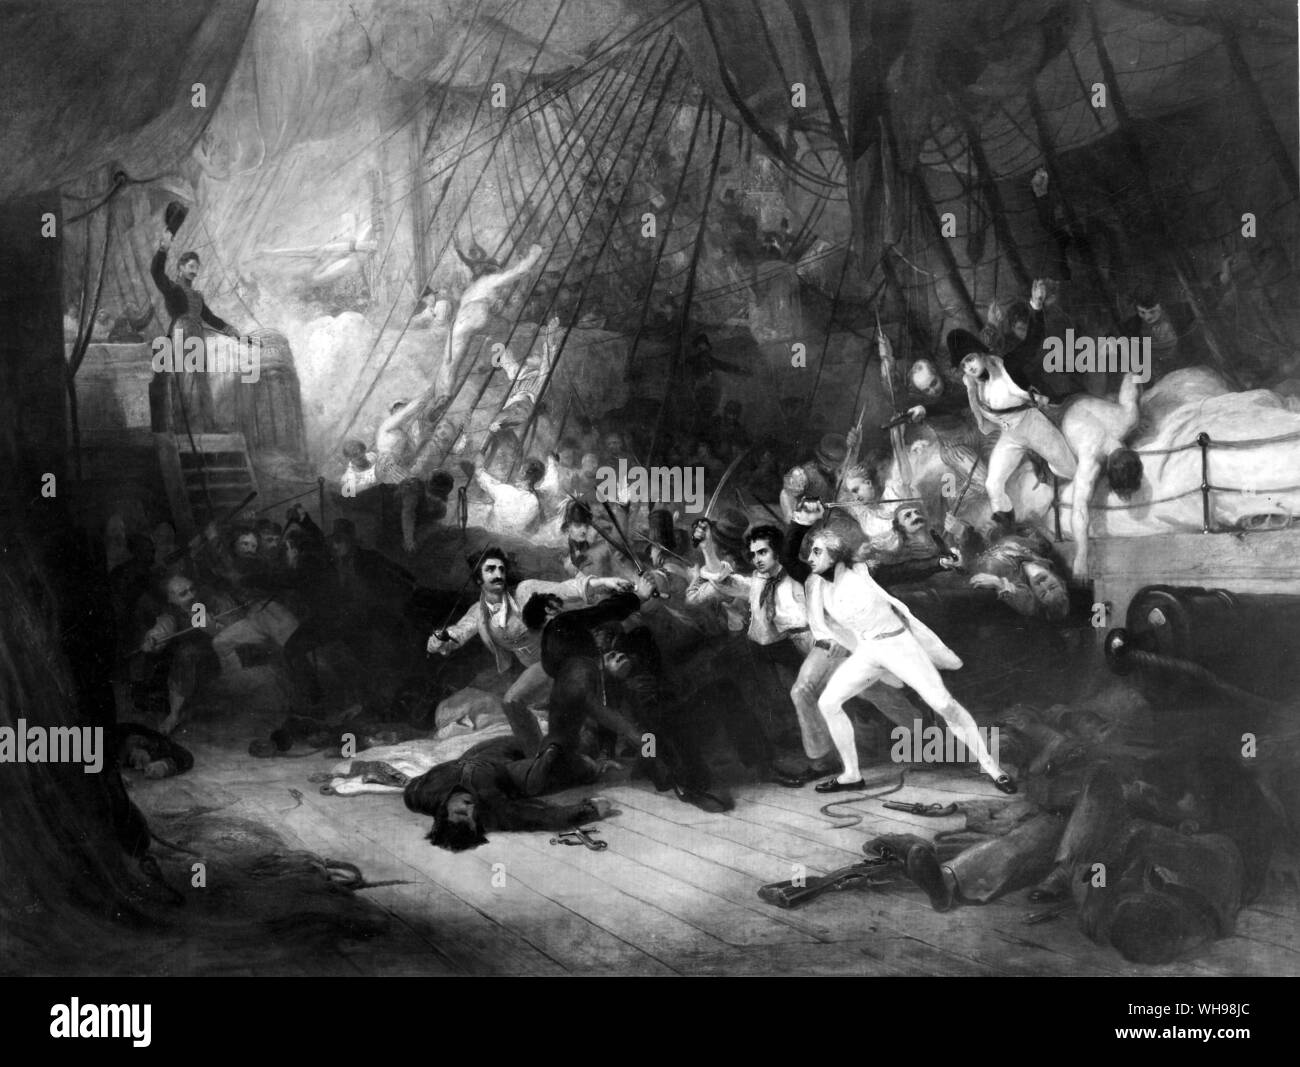 Warfare/Admiral Lord Nelson boarding at San Josef, 1797, an incident during the battle at Cape St Vincent. Stock Photo